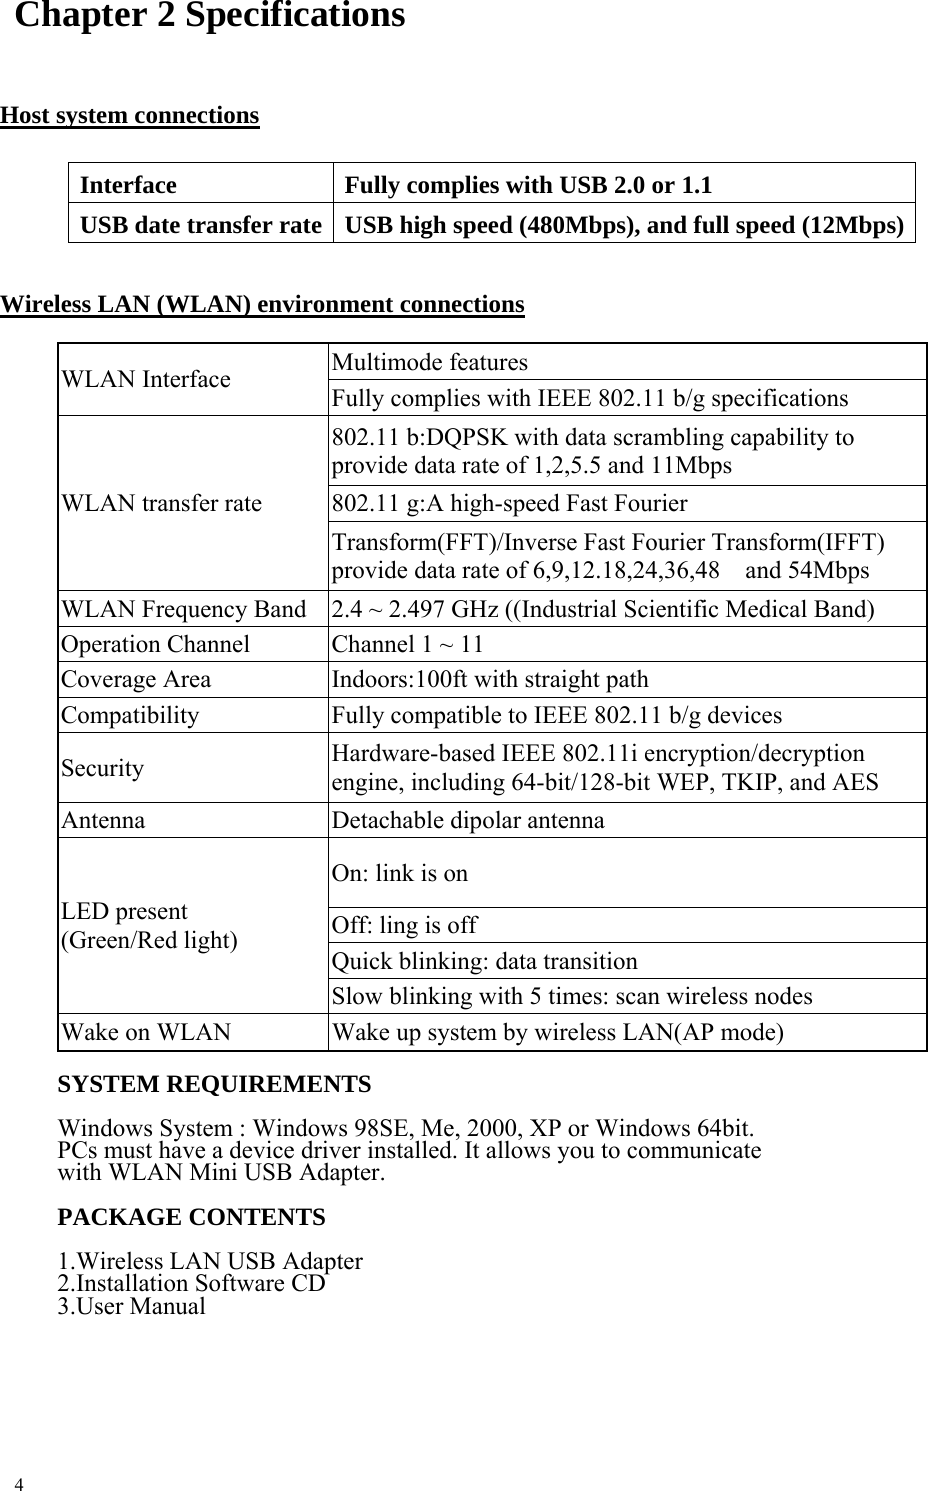  Chapter 2 Specifications  Host system connections  Interface  Fully complies with USB 2.0 or 1.1 USB date transfer rate  USB high speed (480Mbps), and full speed (12Mbps) Wireless LAN (WLAN) environment connections  Multimode features WLAN Interface  Fully complies with IEEE 802.11 b/g specifications 802.11 b:DQPSK with data scrambling capability to provide data rate of 1,2,5.5 and 11Mbps 802.11 g:A high-speed Fast Fourier WLAN transfer rate Transform(FFT)/Inverse Fast Fourier Transform(IFFT) provide data rate of 6,9,12.18,24,36,48    and 54Mbps WLAN Frequency Band  2.4 ~ 2.497 GHz ((Industrial Scientific Medical Band) Operation Channel  Channel 1 ~ 11 Coverage Area  Indoors:100ft with straight path Compatibility  Fully compatible to IEEE 802.11 b/g devices Security  Hardware-based IEEE 802.11i encryption/decryption engine, including 64-bit/128-bit WEP, TKIP, and AES Antenna  Detachable dipolar antenna On: link is on Off: ling is off Quick blinking: data transition LED present (Green/Red light) Slow blinking with 5 times: scan wireless nodes Wake on WLAN  Wake up system by wireless LAN(AP mode)  SYSTEM REQUIREMENTS  Windows System : Windows 98SE, Me, 2000, XP or Windows 64bit. PCs must have a device driver installed. It allows you to communicate with WLAN Mini USB Adapter.  PACKAGE CONTENTS  1.Wireless LAN USB Adapter 2.Installation Software CD 3.User Manual        4 